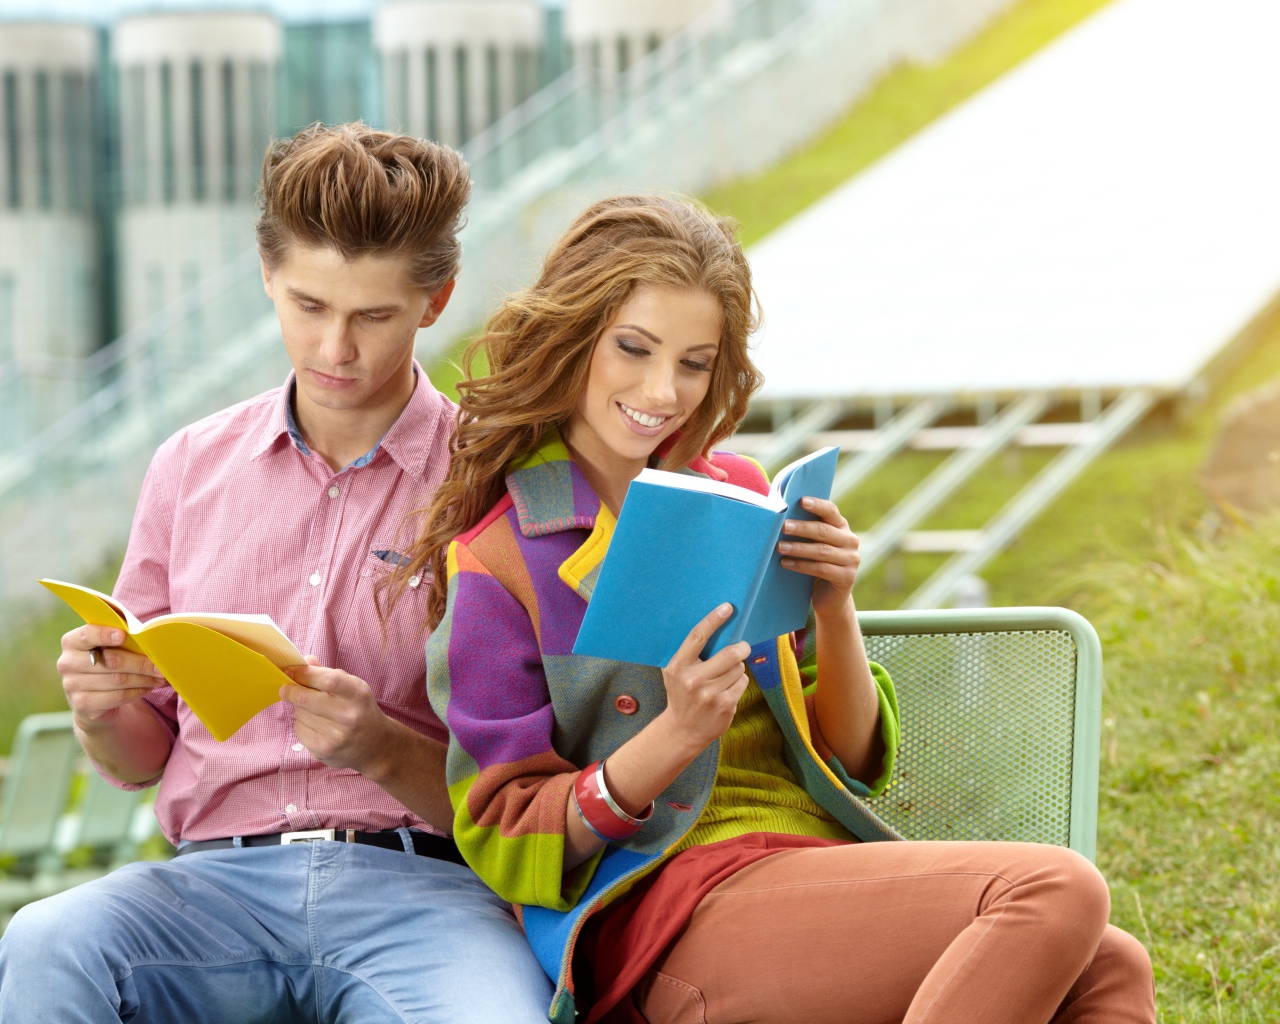 A guy and a girl are reading books sitting on a bench